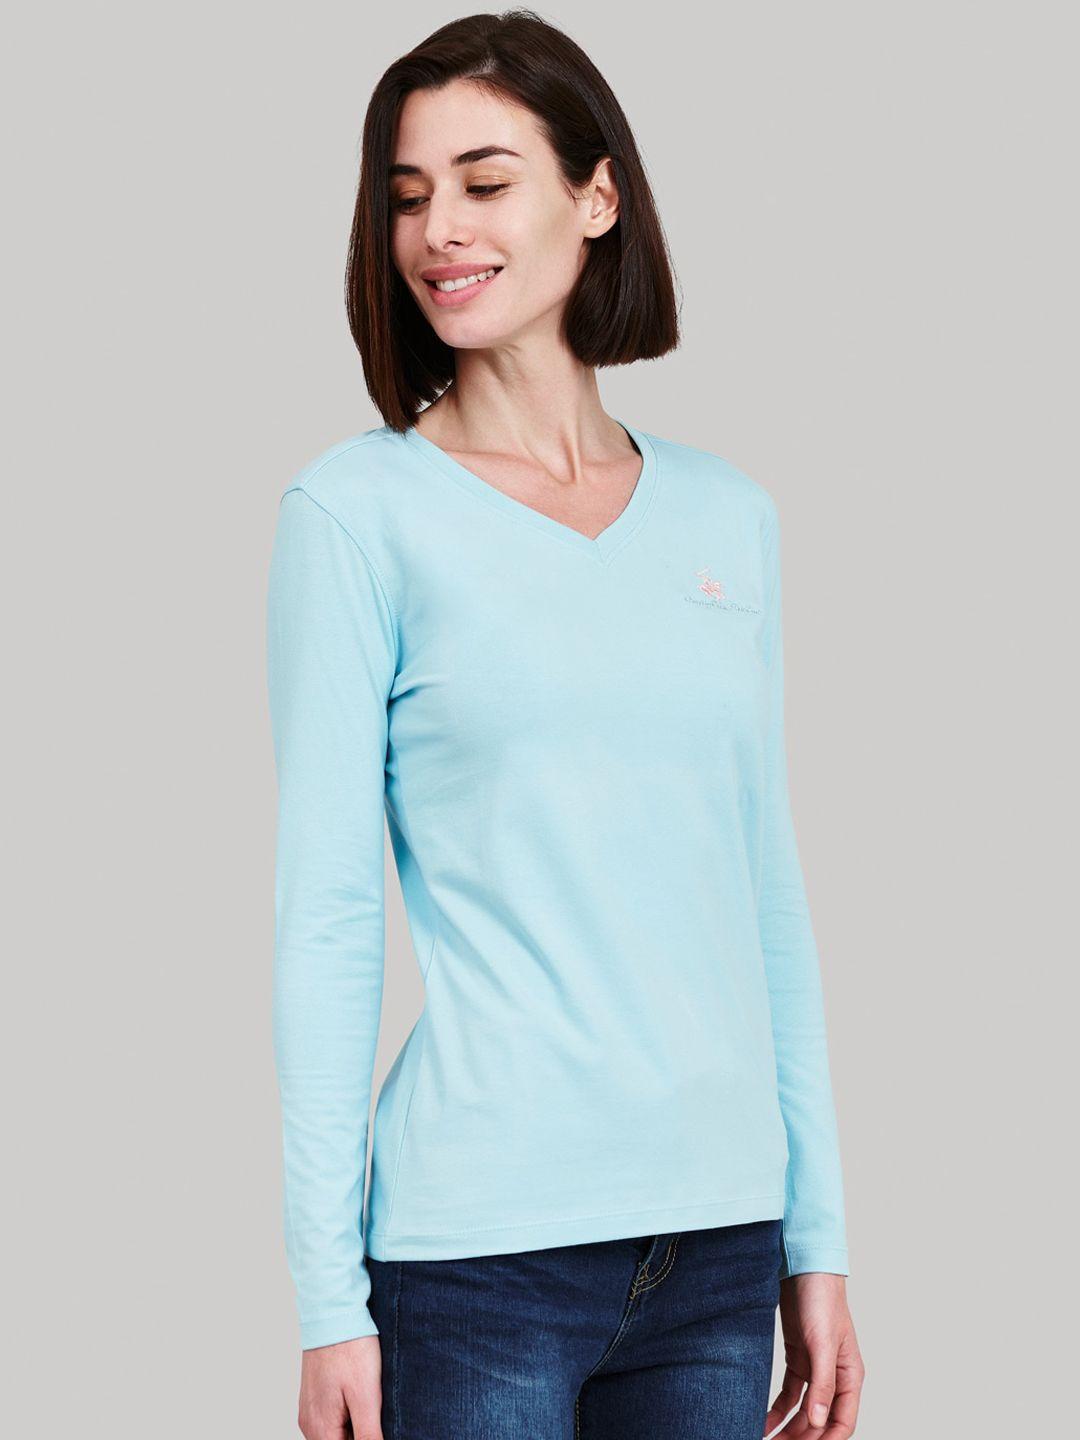 beverly hills polo club women turquoise blue solid v-neck t-shirt